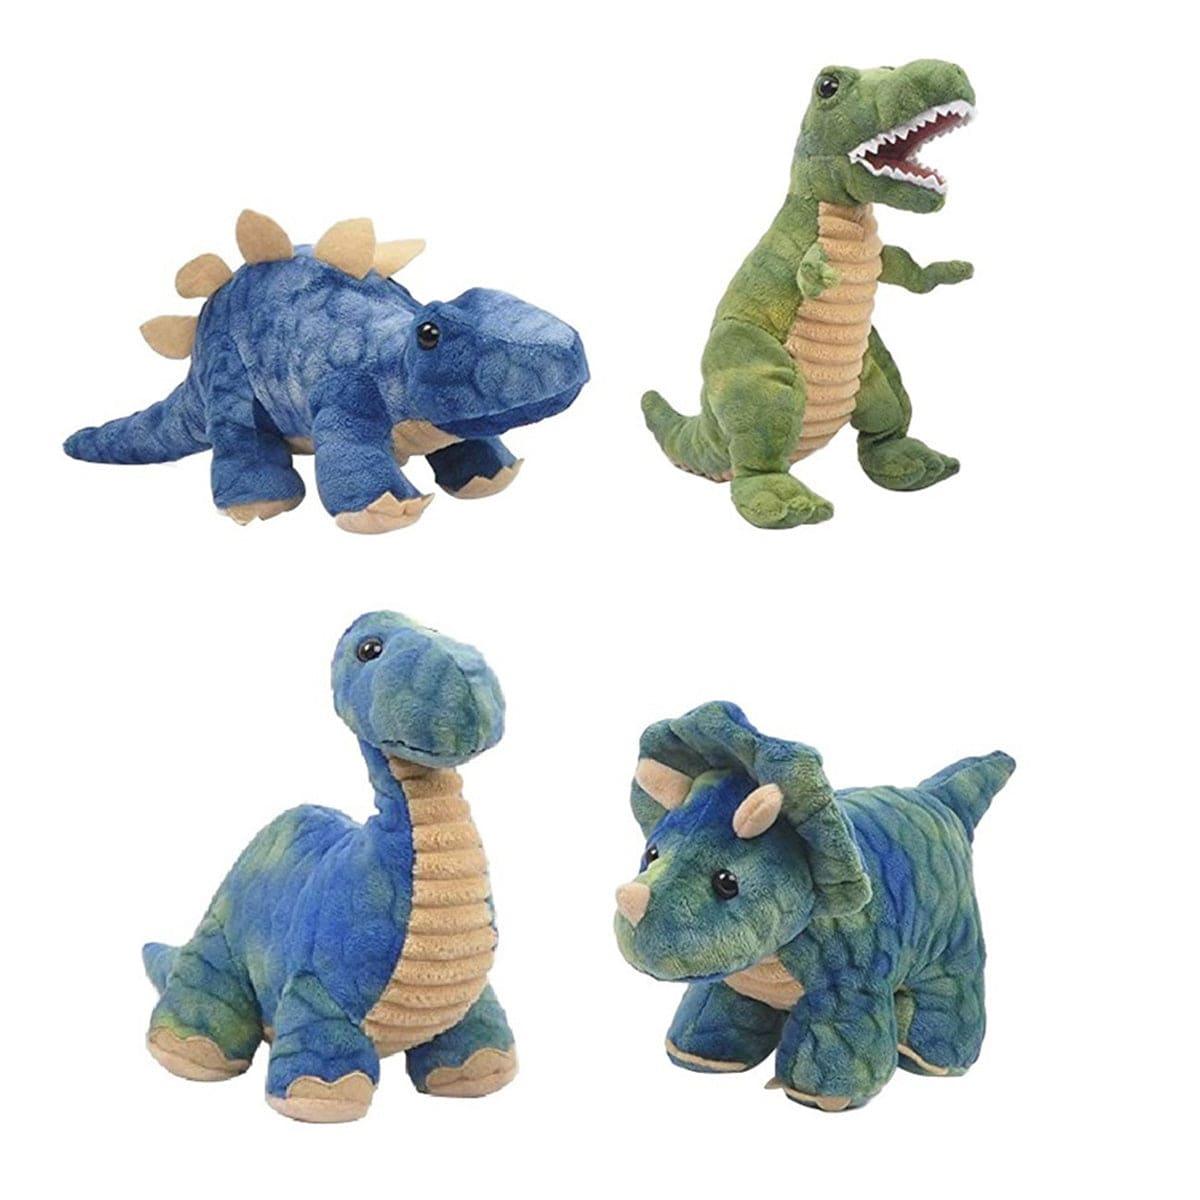 LINZY TOYS INC. Plushes Dino-Mite Plush, 7.5 in, Assortment, 1 Count